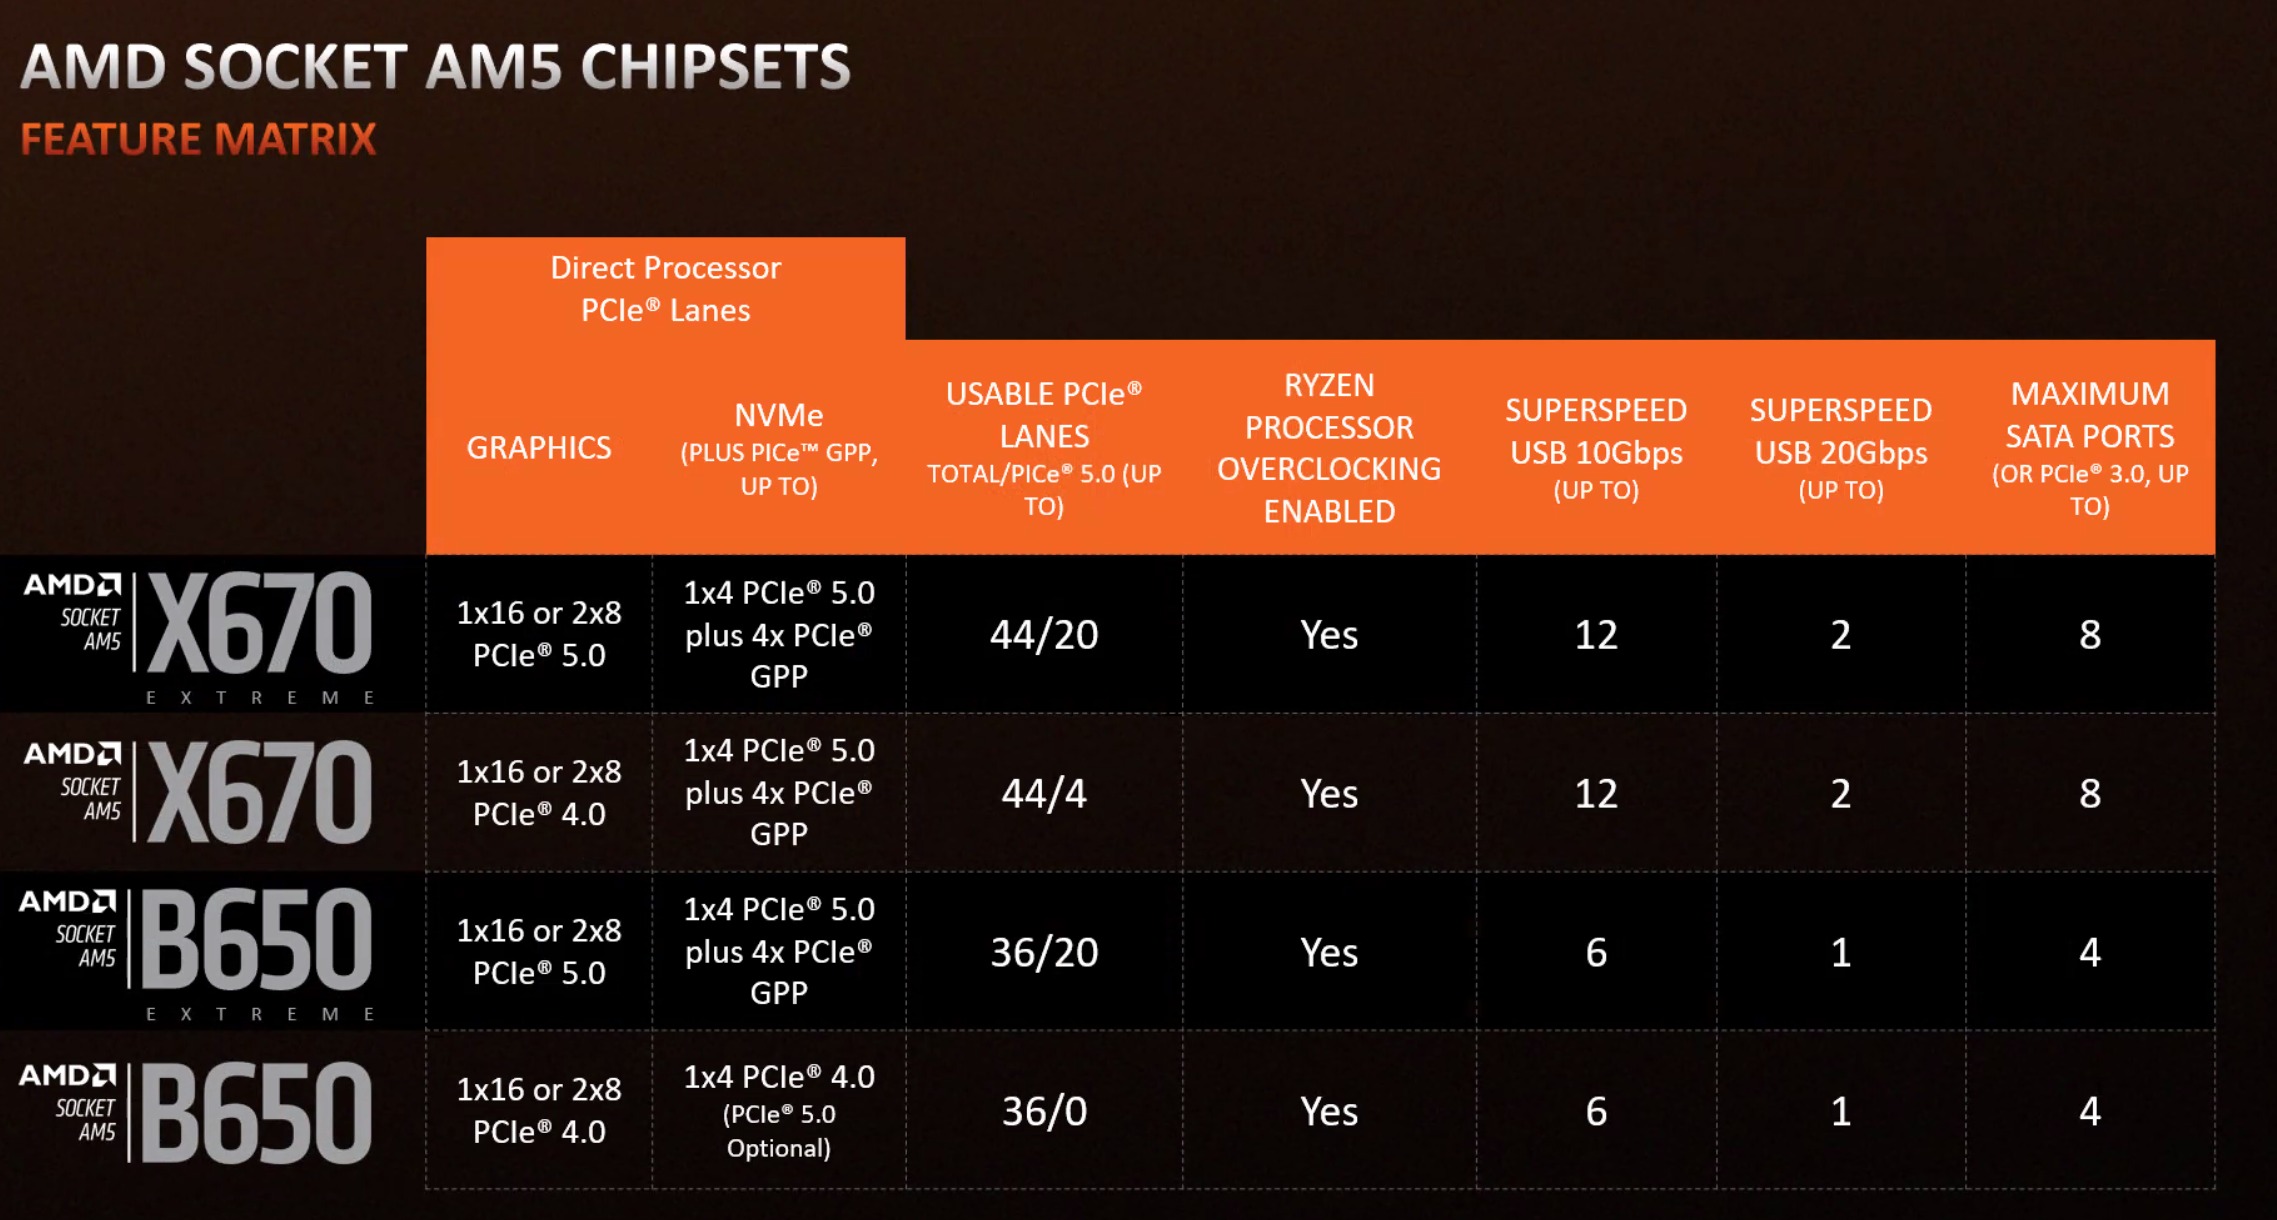 AMD Socket AM5 Chipset Comparison Chart with X670 Extreme, X670, B650 Extreme, and B650